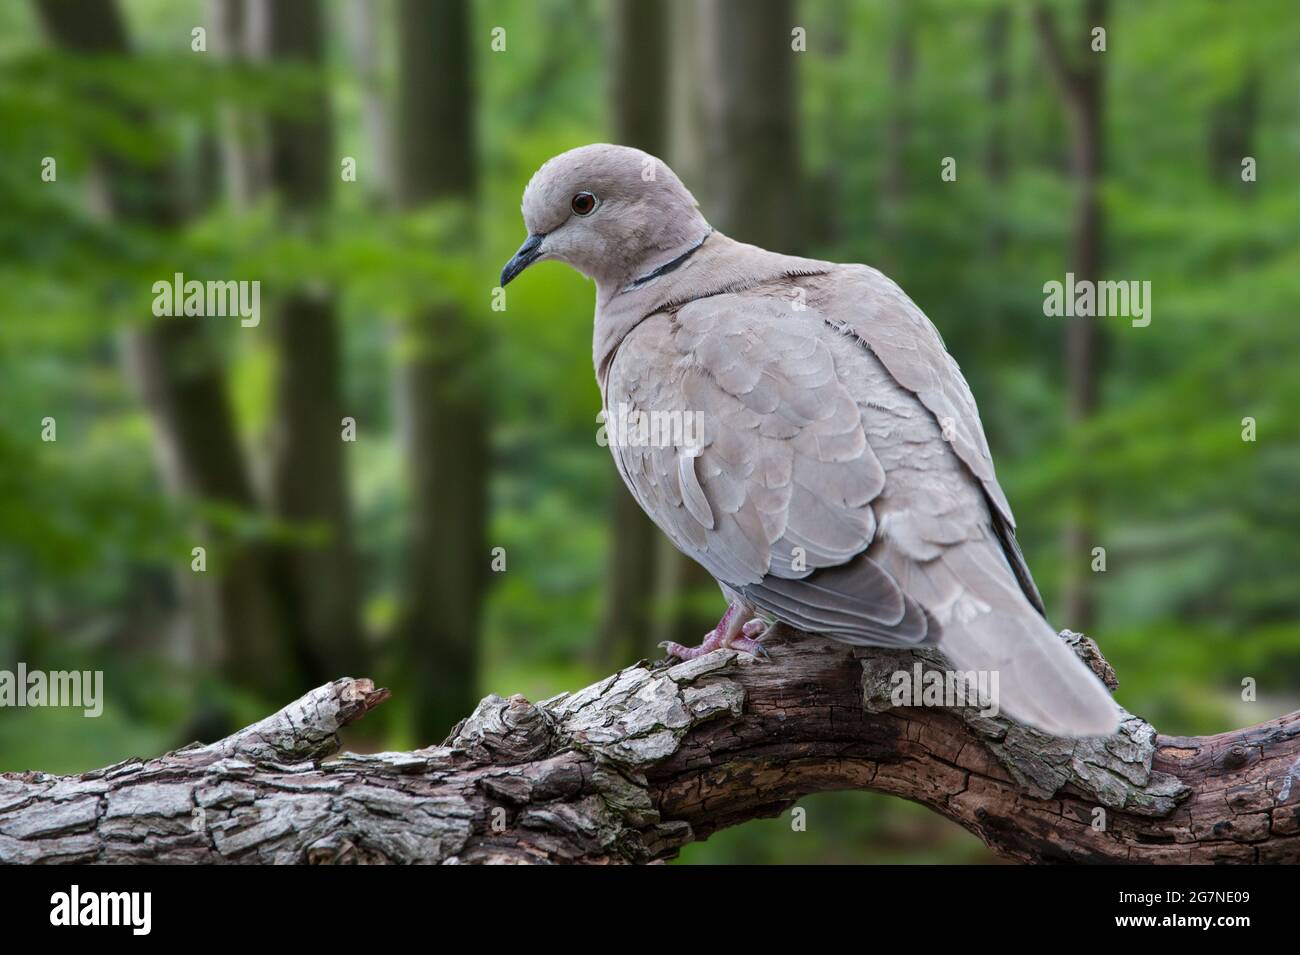 Eurasian collared dove (Streptopelia decaocto) perched in tree in forest Stock Photo